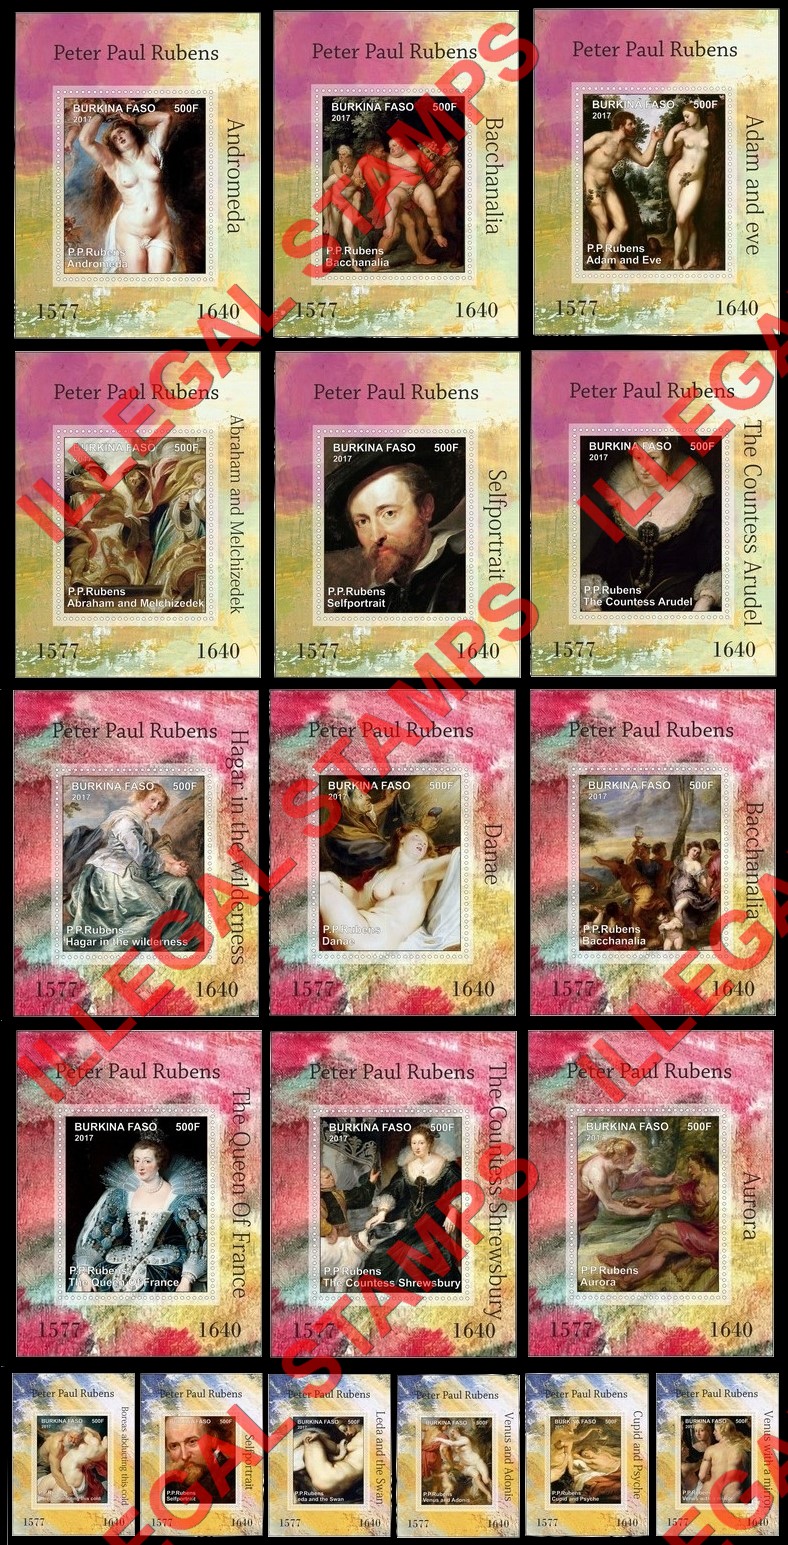 Burkina Faso 2017 Paintings by Peter Paul Rubens Illegal Stamp Deluxe Souvenir Sheets of 1